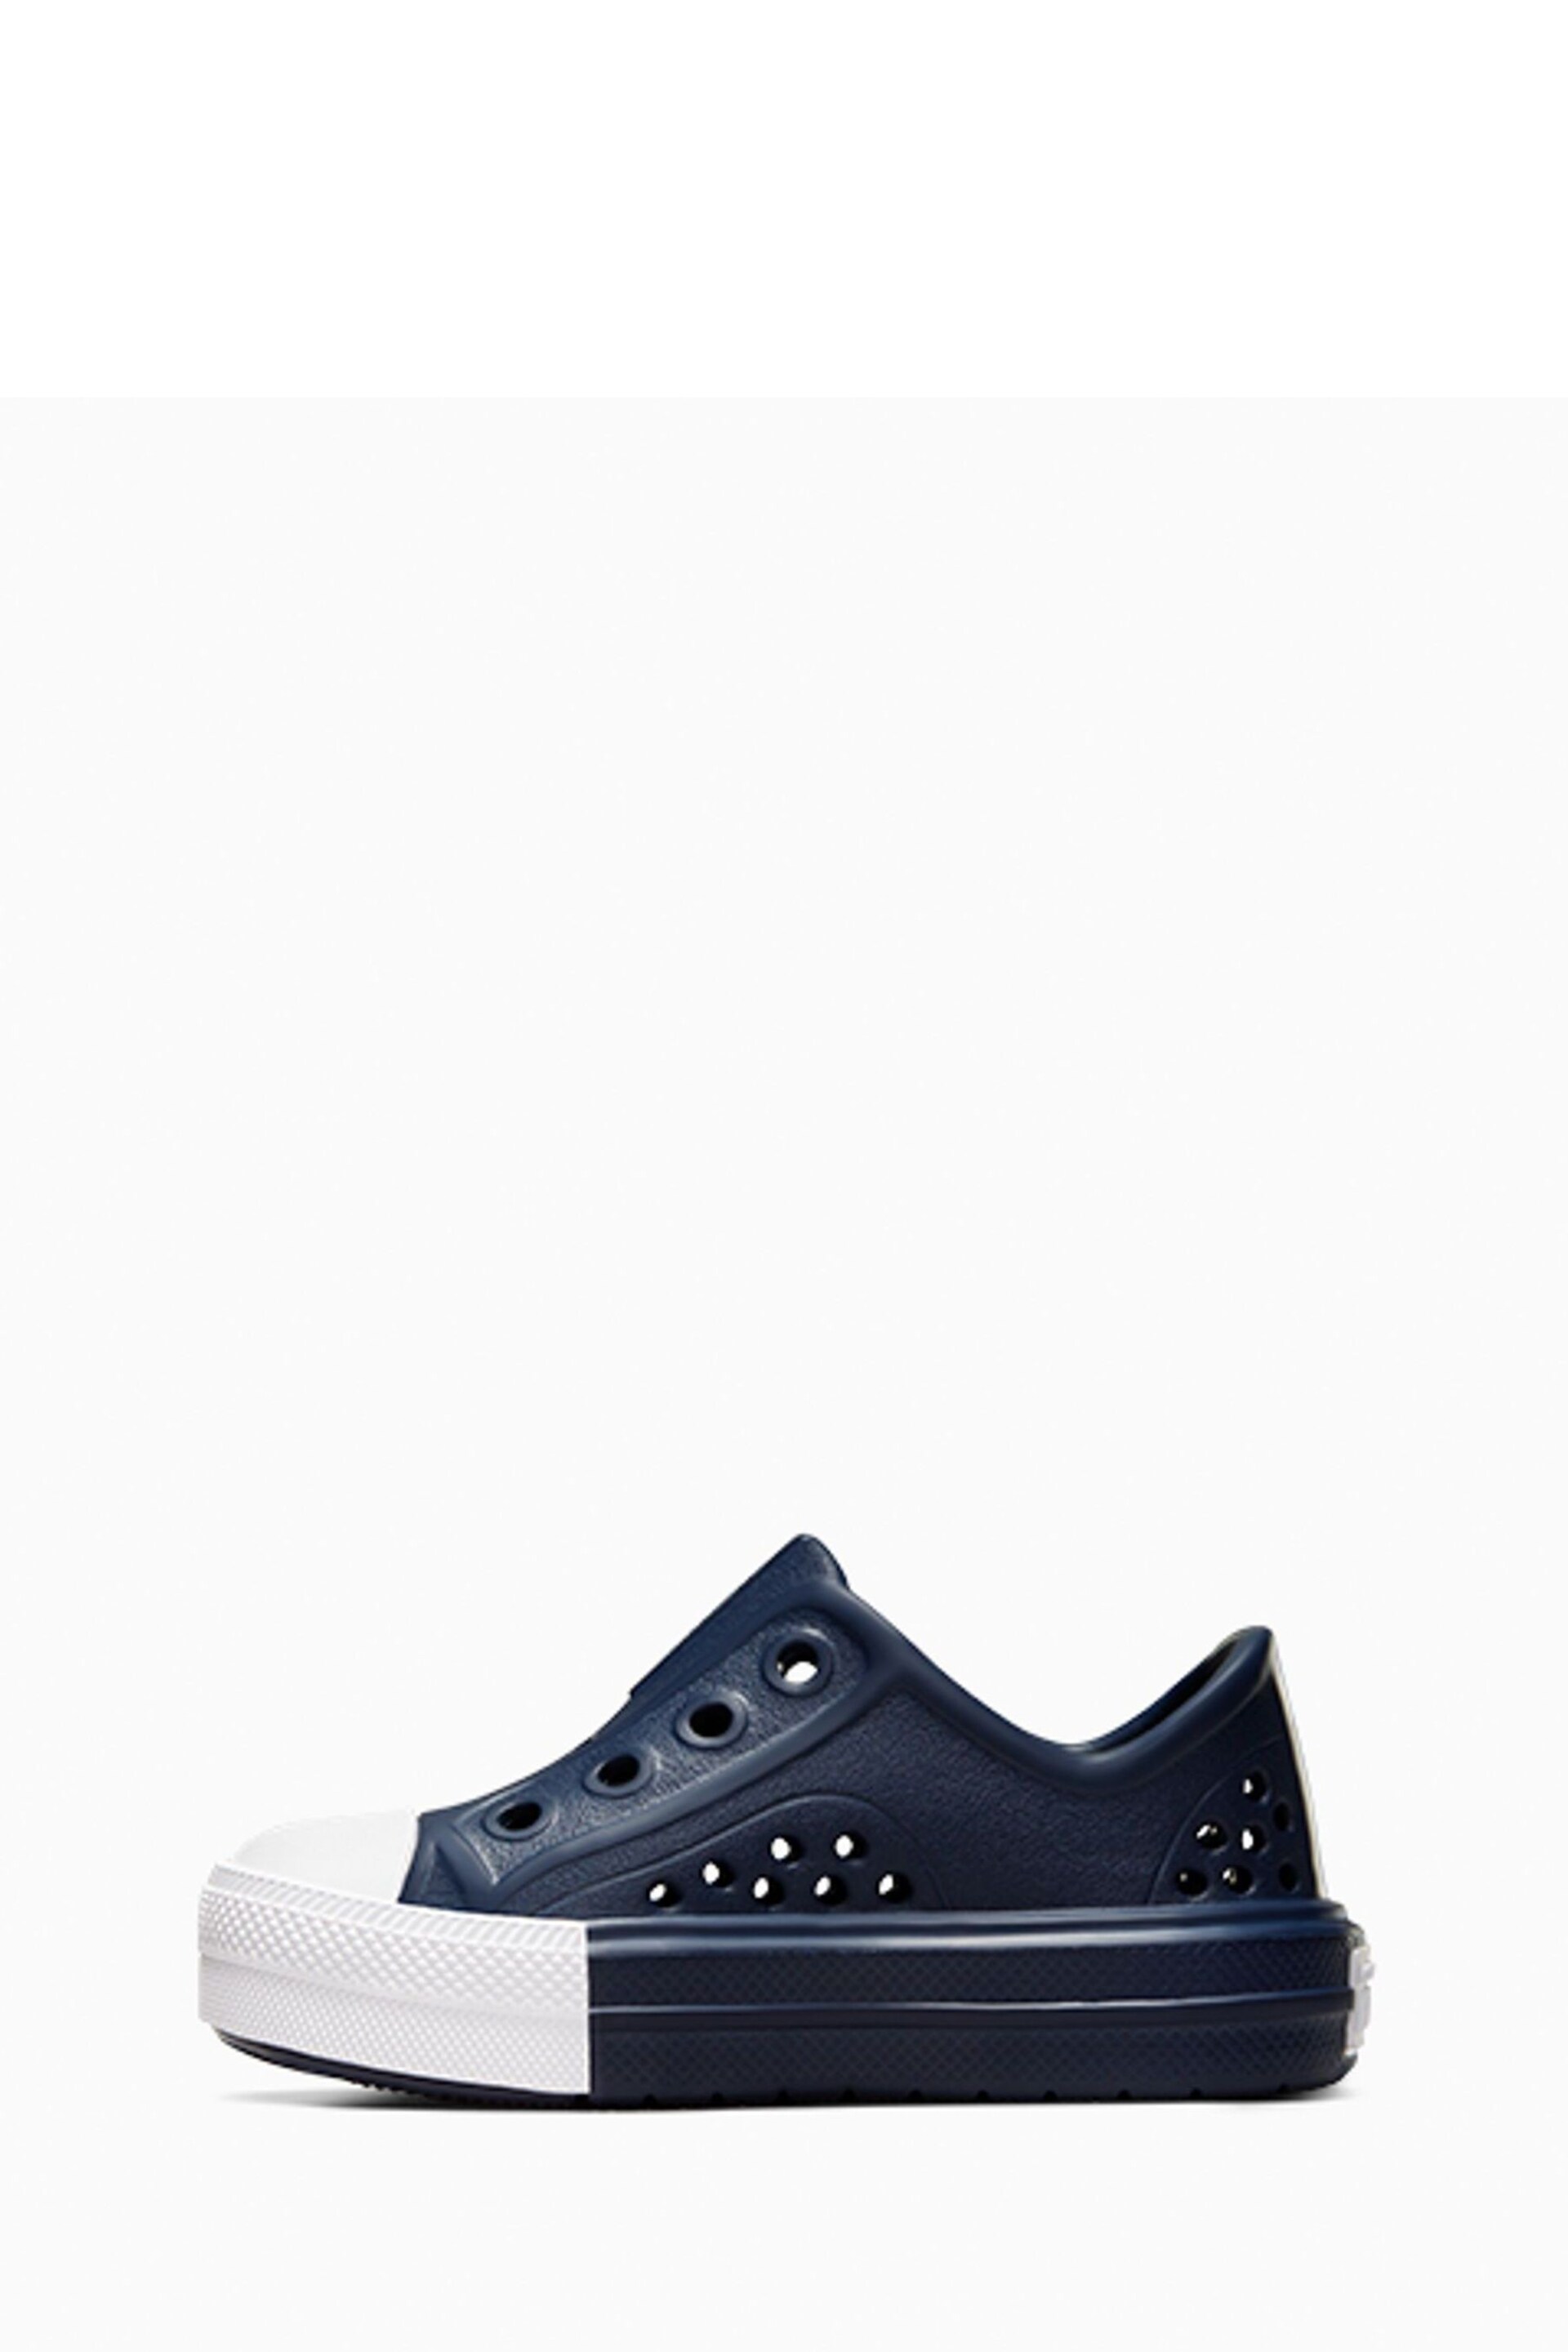 Converse Navy Play Lite Toddler Sandals - Image 2 of 10